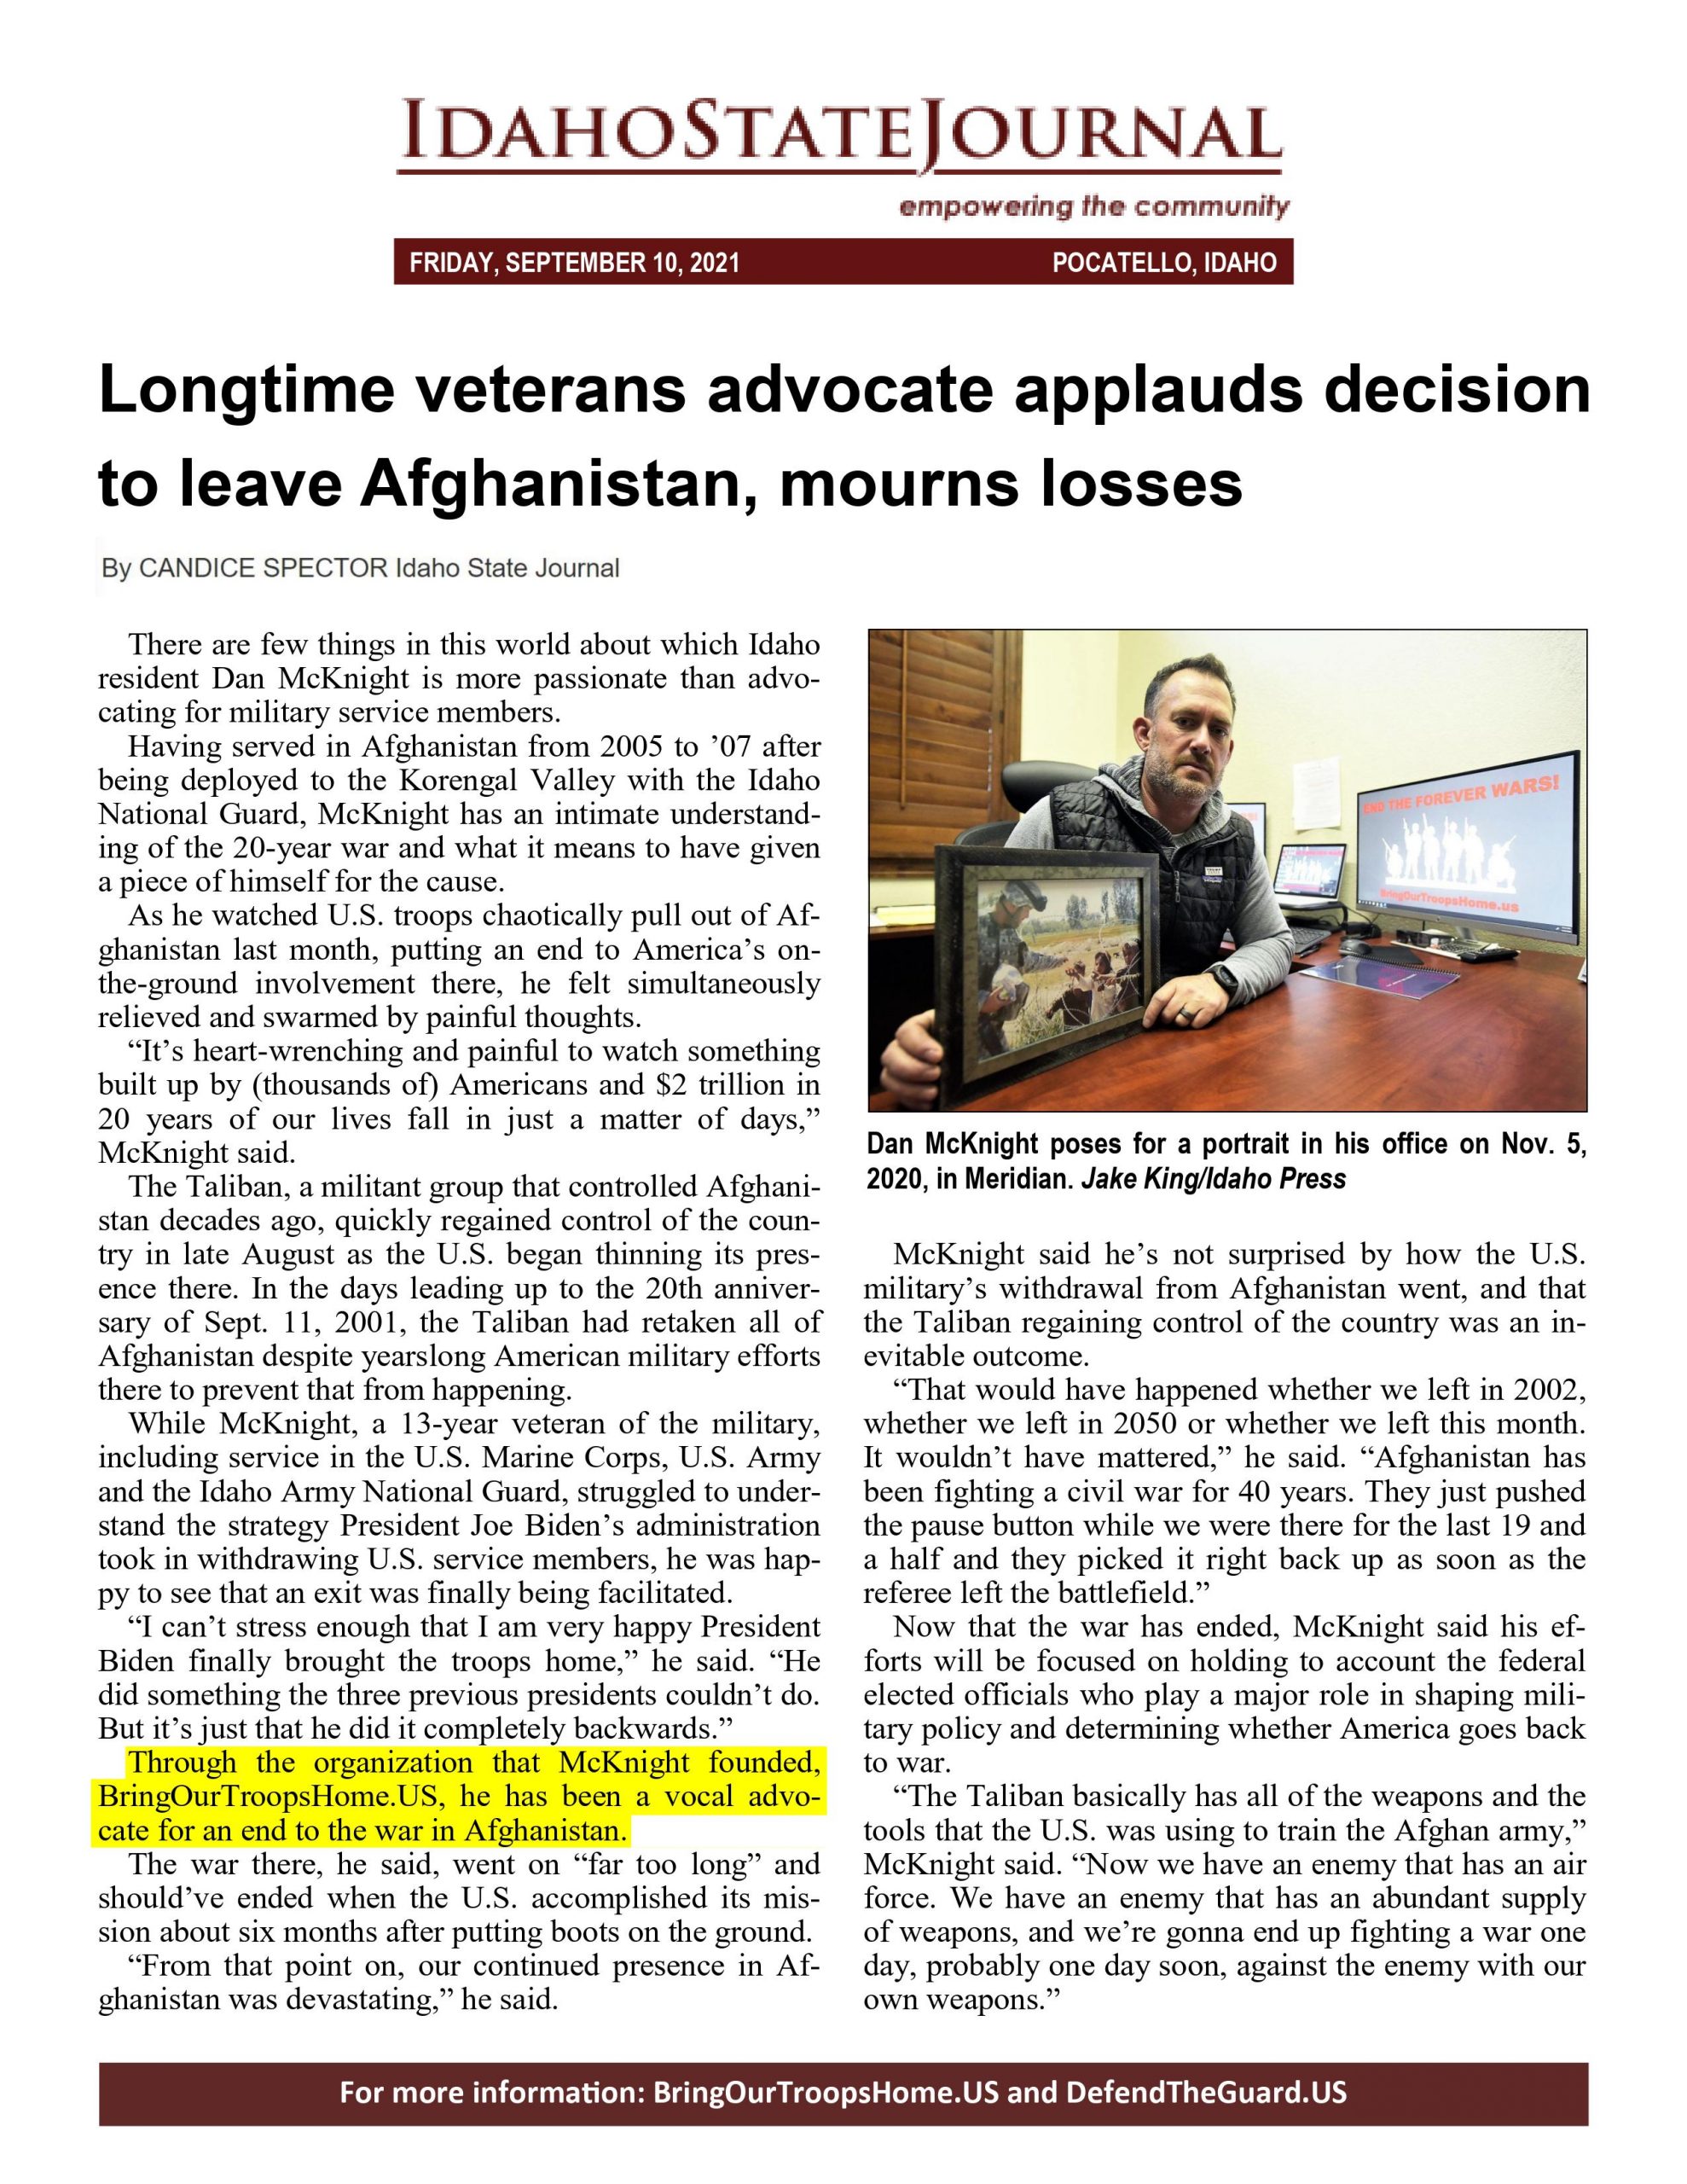 Longtime Veterans Advocate Applauds Decision to Leave Afghanistan, Mourns Losses